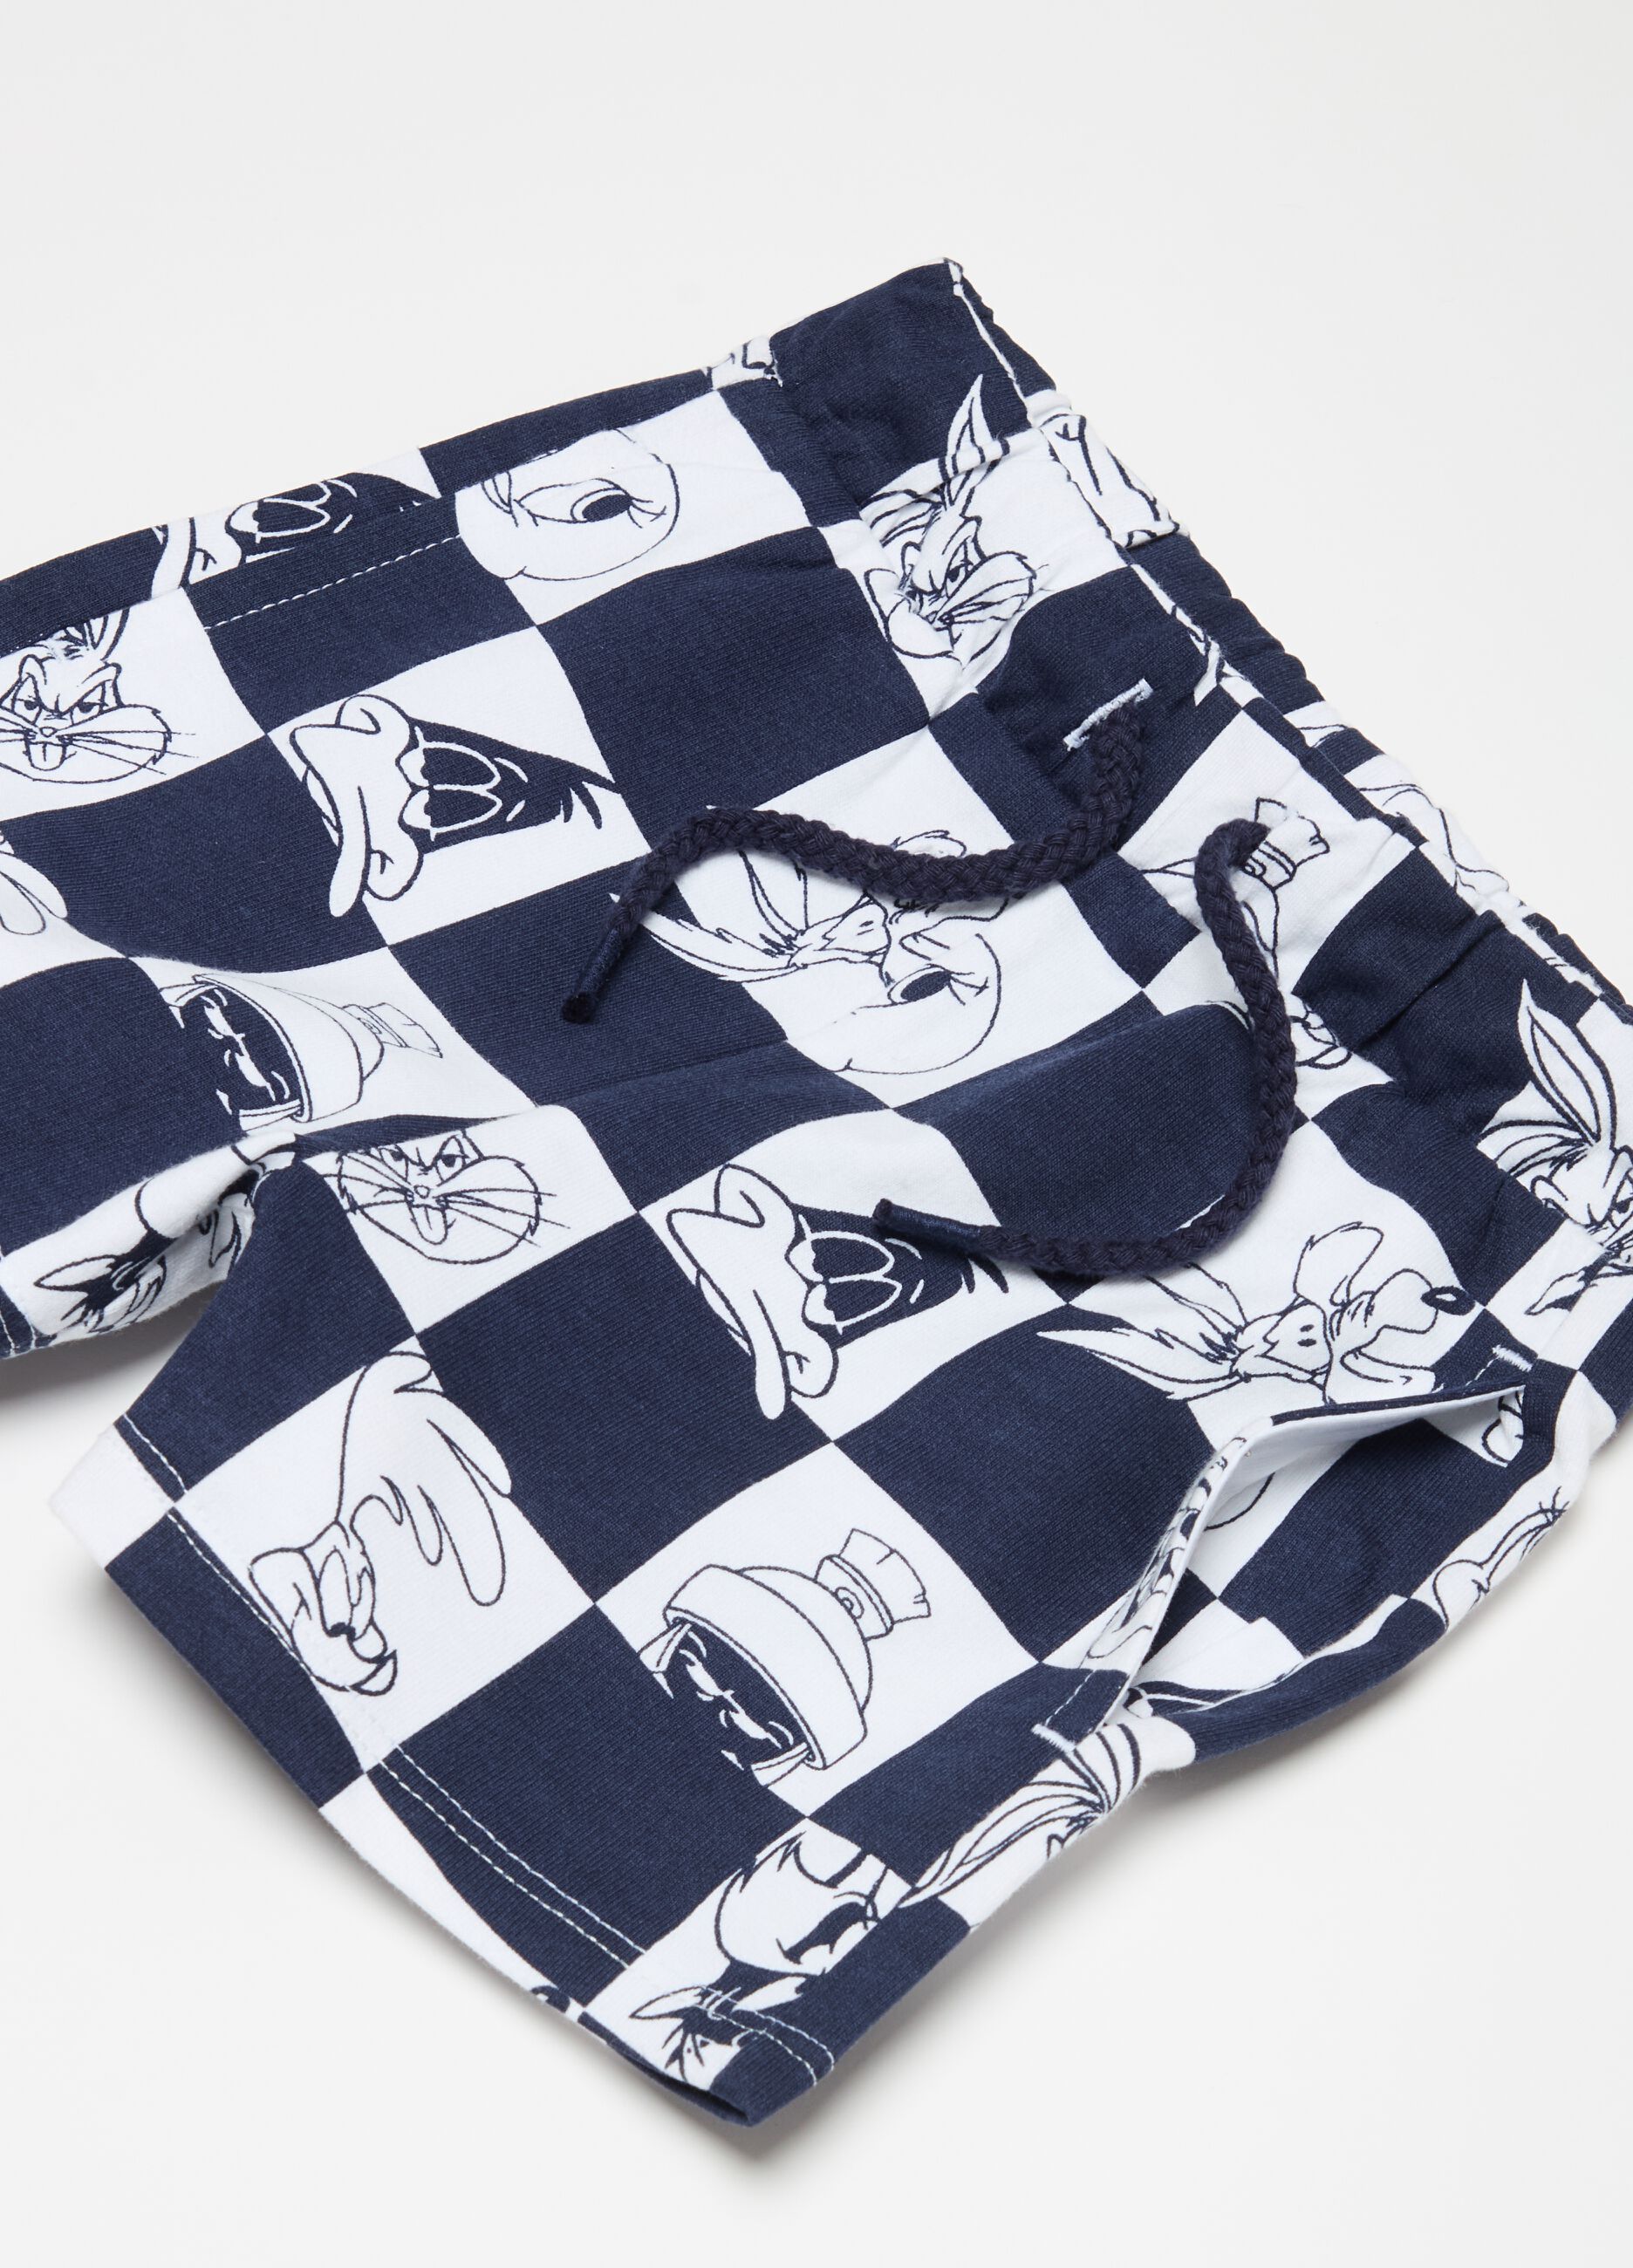 Jogging set with Bugs Bunny surfer print